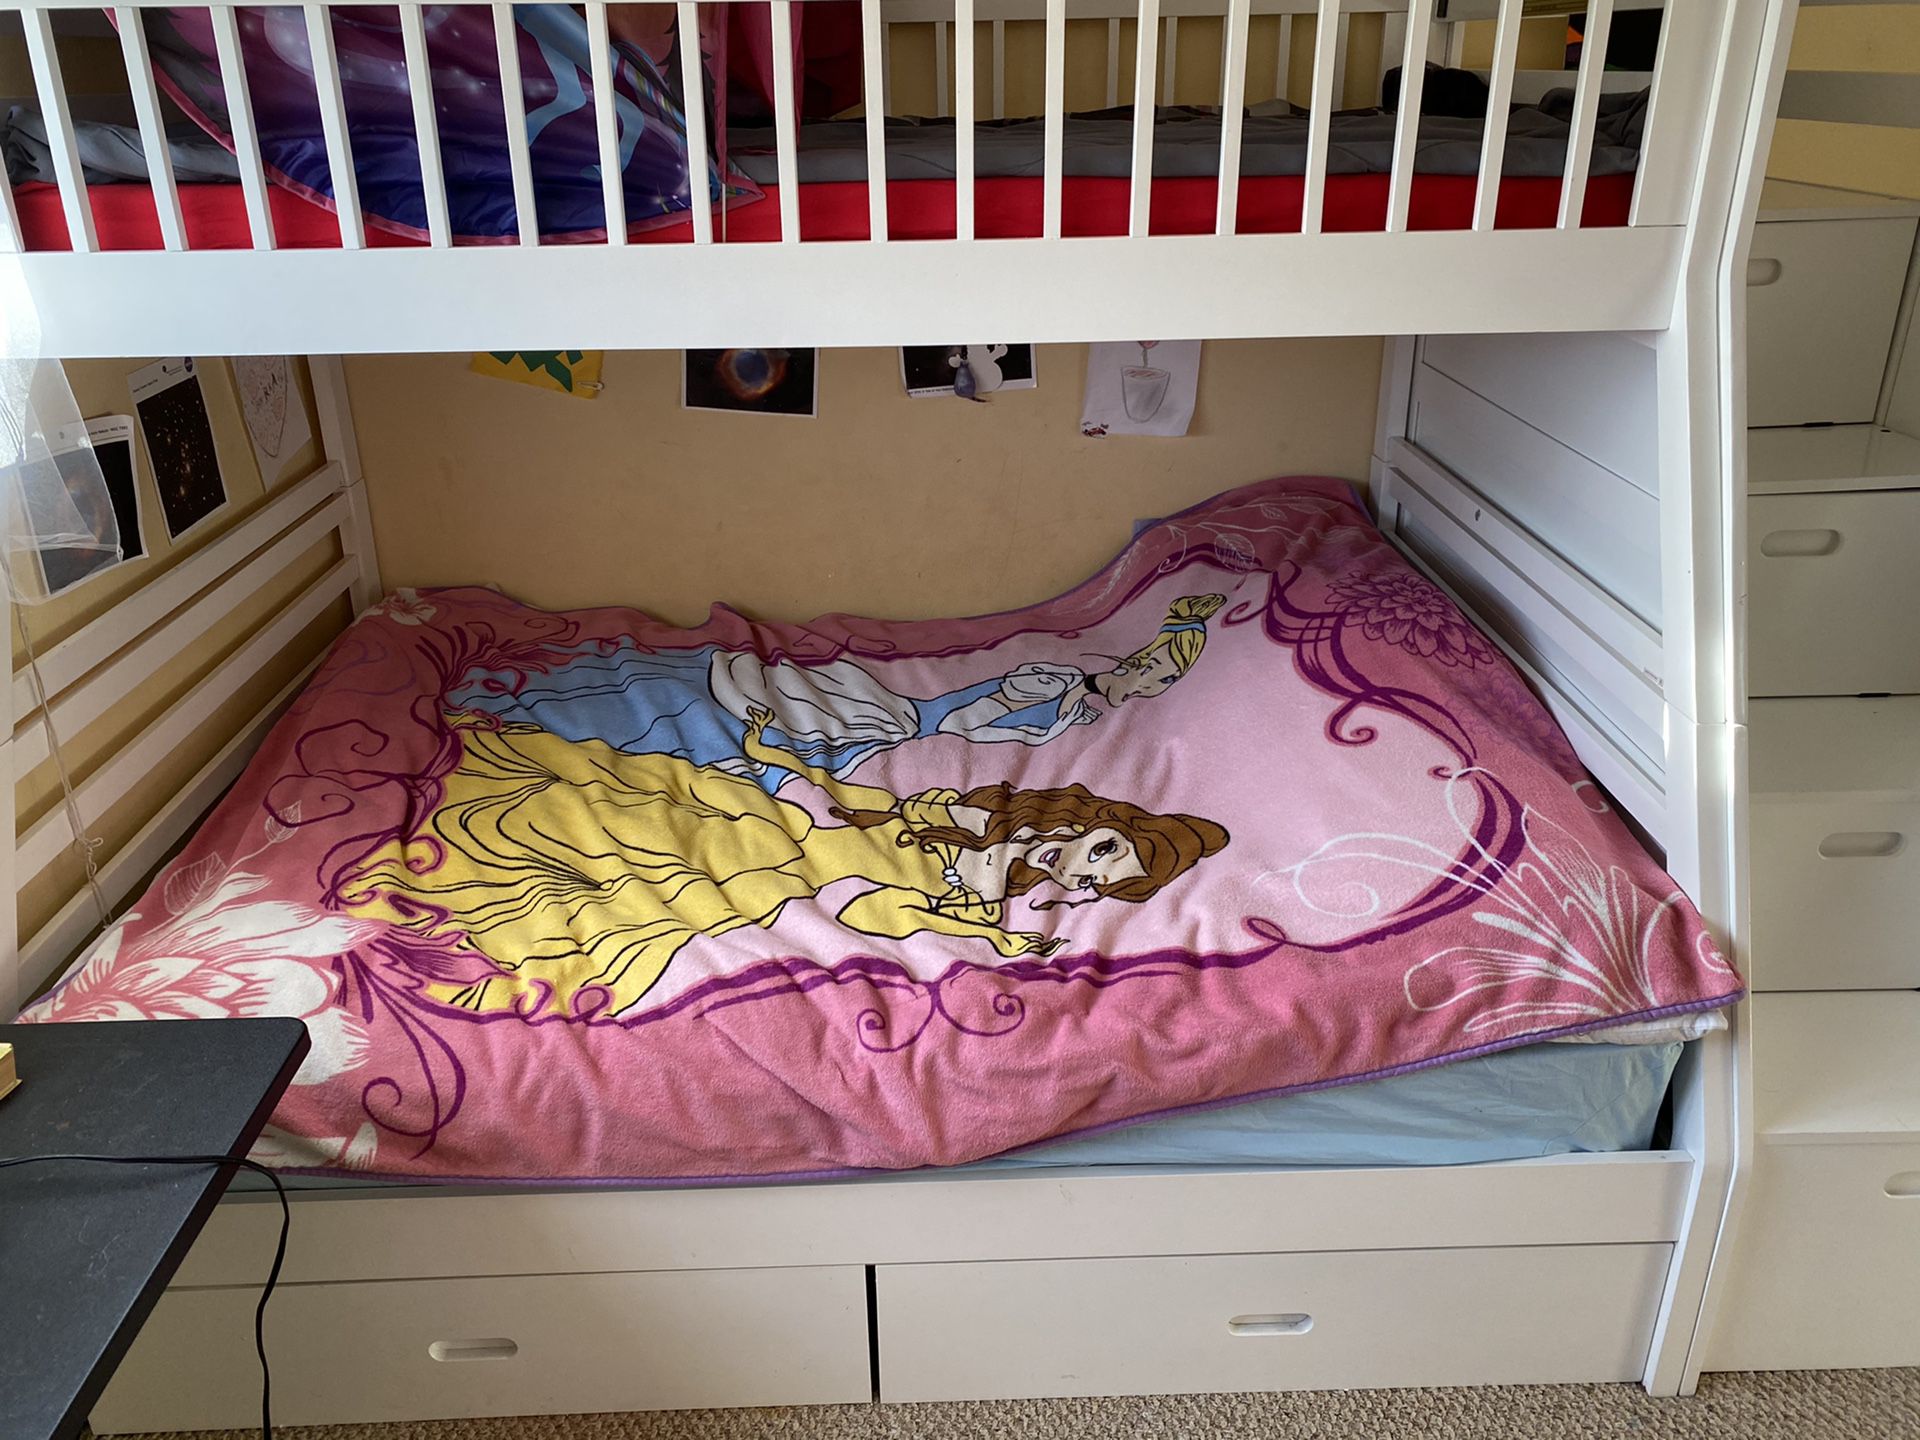 bunk bed with mattresses. Used 1 year. Clean, looks like new.